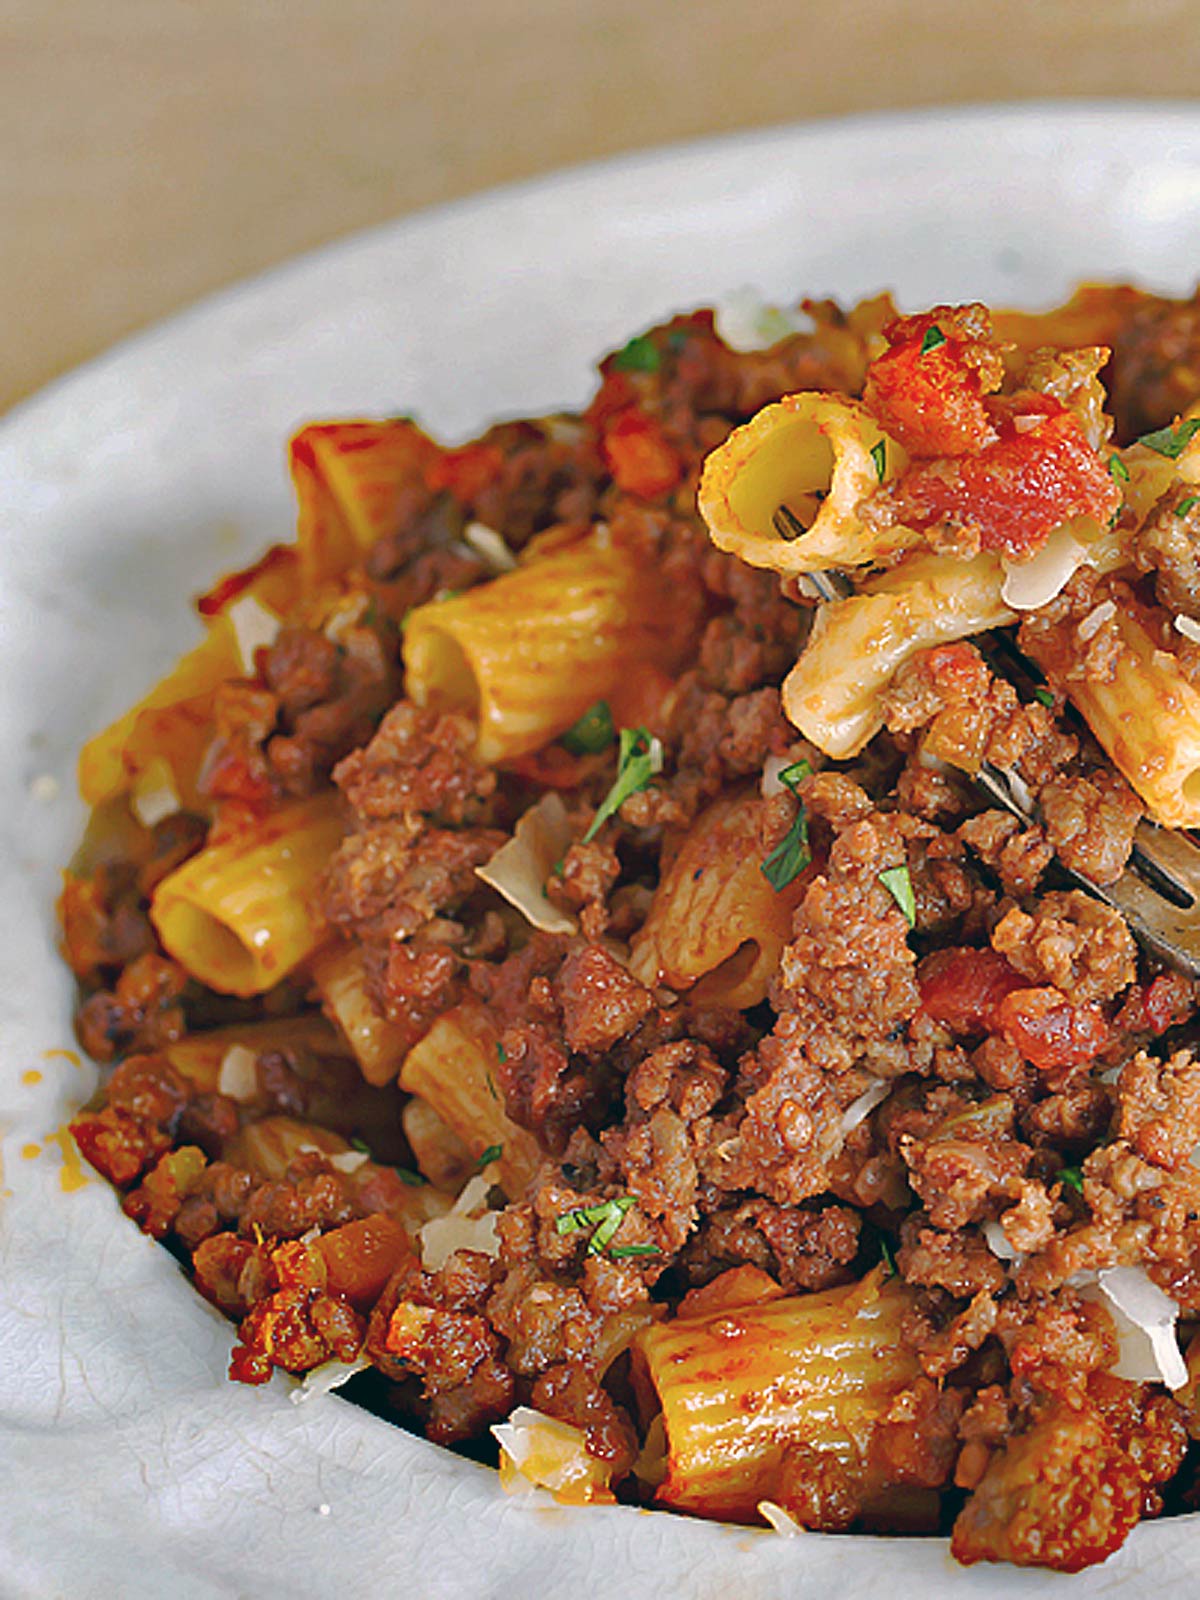 Bowl of bolognese with rigatoni noodles.